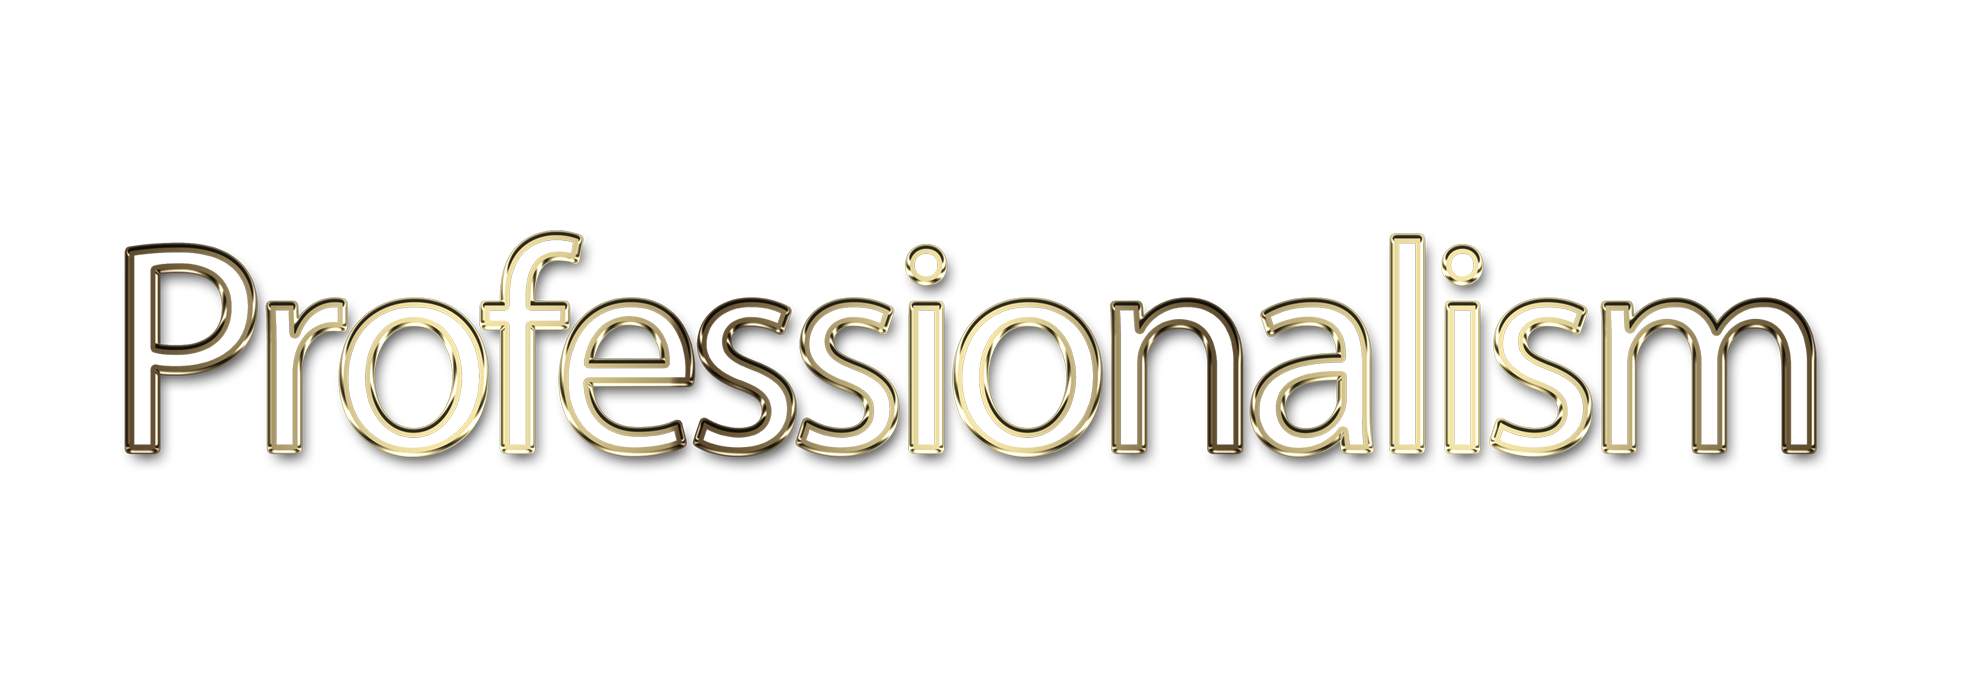 Professionalism png, word Professionalism png, Professionalism word png, Professionalism text png, Professionalism letters png, Professionalism word art typography PNG images, transparent png